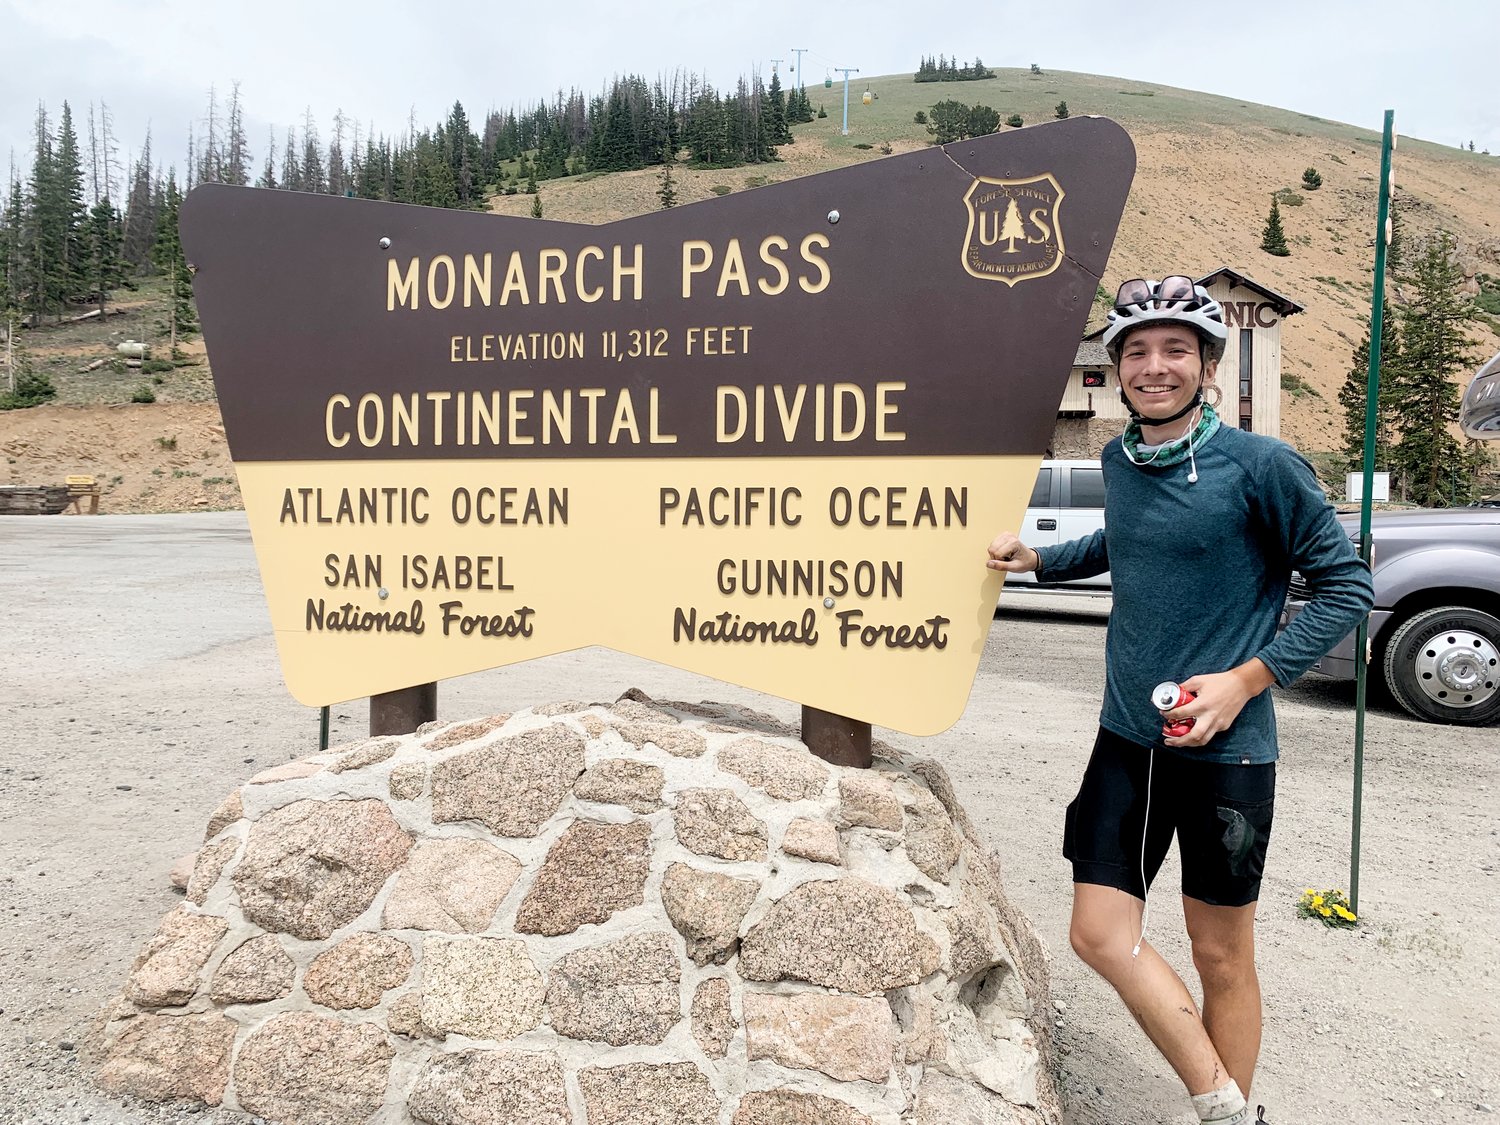 Emmaus Holder poses in front of the sign at Monarch Pass in Chaffee/Gunnison counties in Colorado during his 56-day cross-country cycling trip this summer.